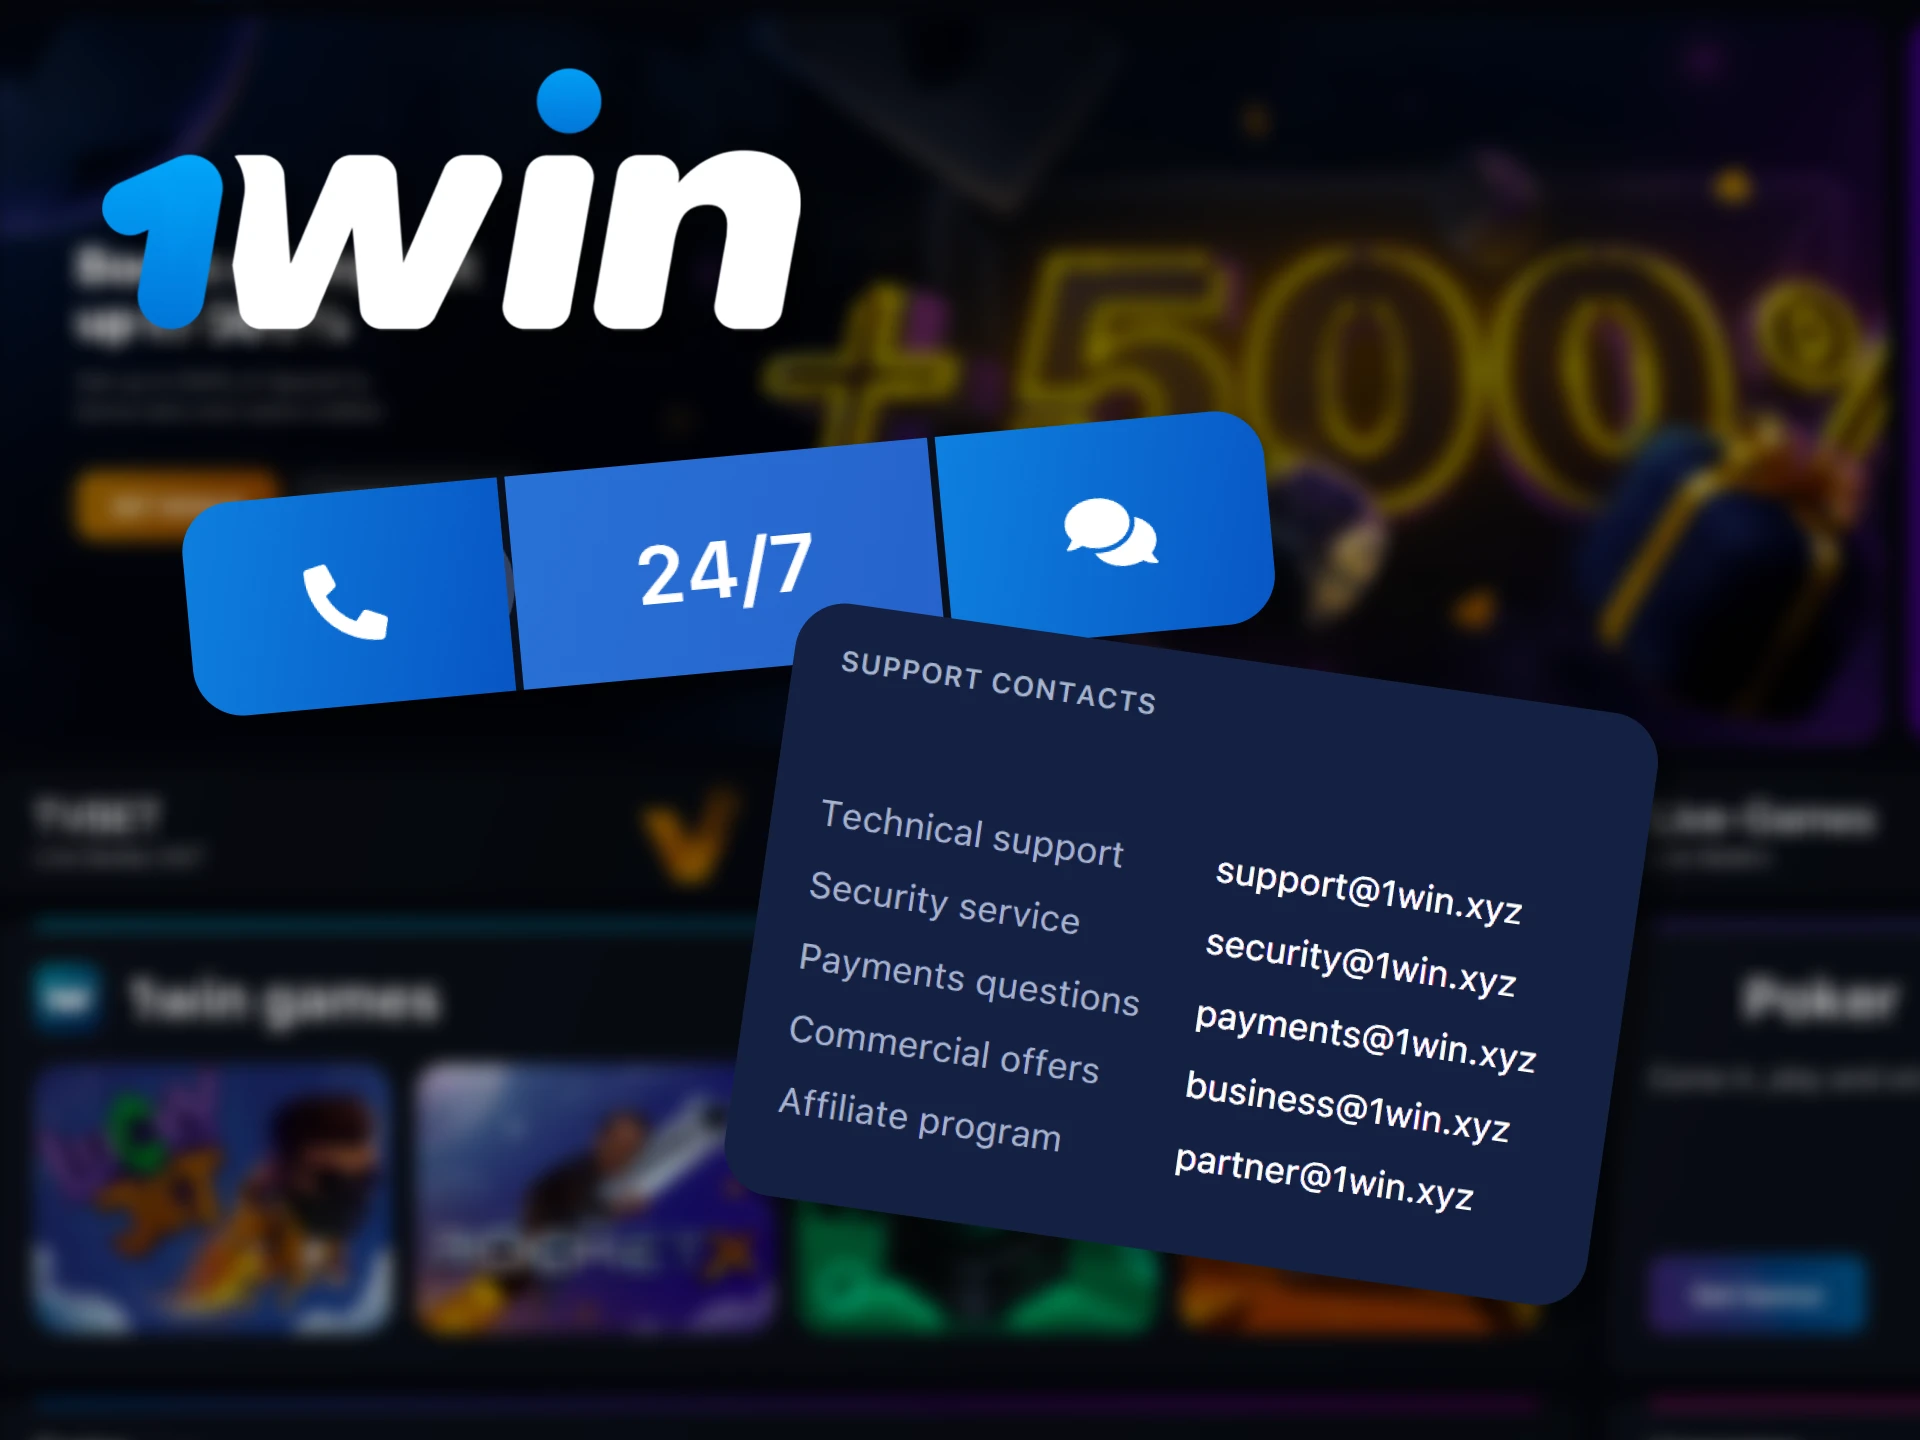 At 1win you can always get support by sending an email.